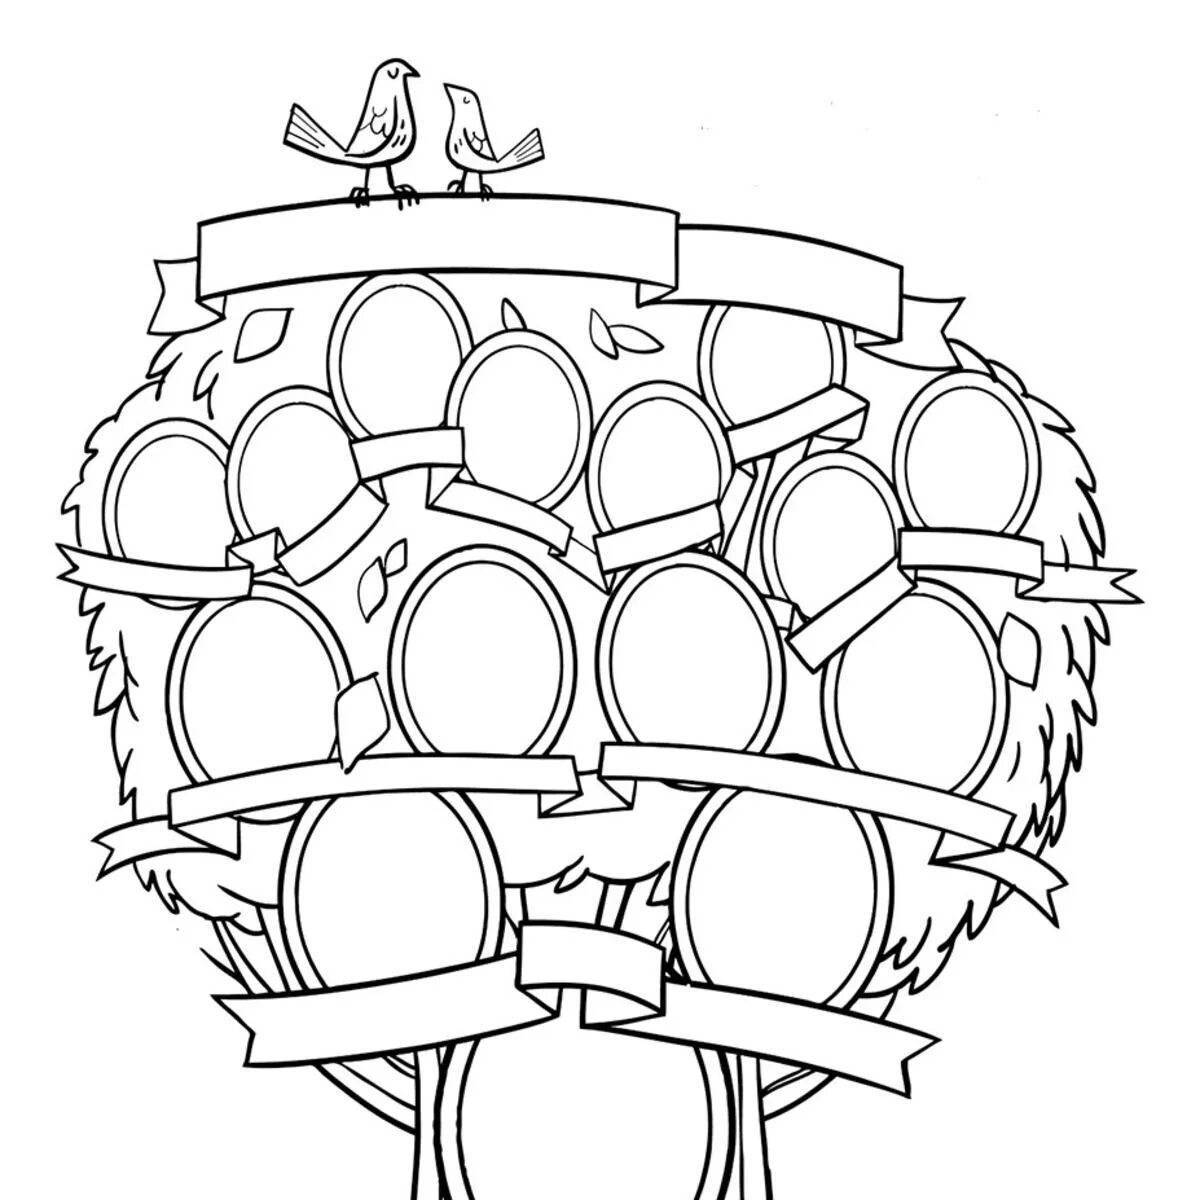 Amazing family tree coloring page